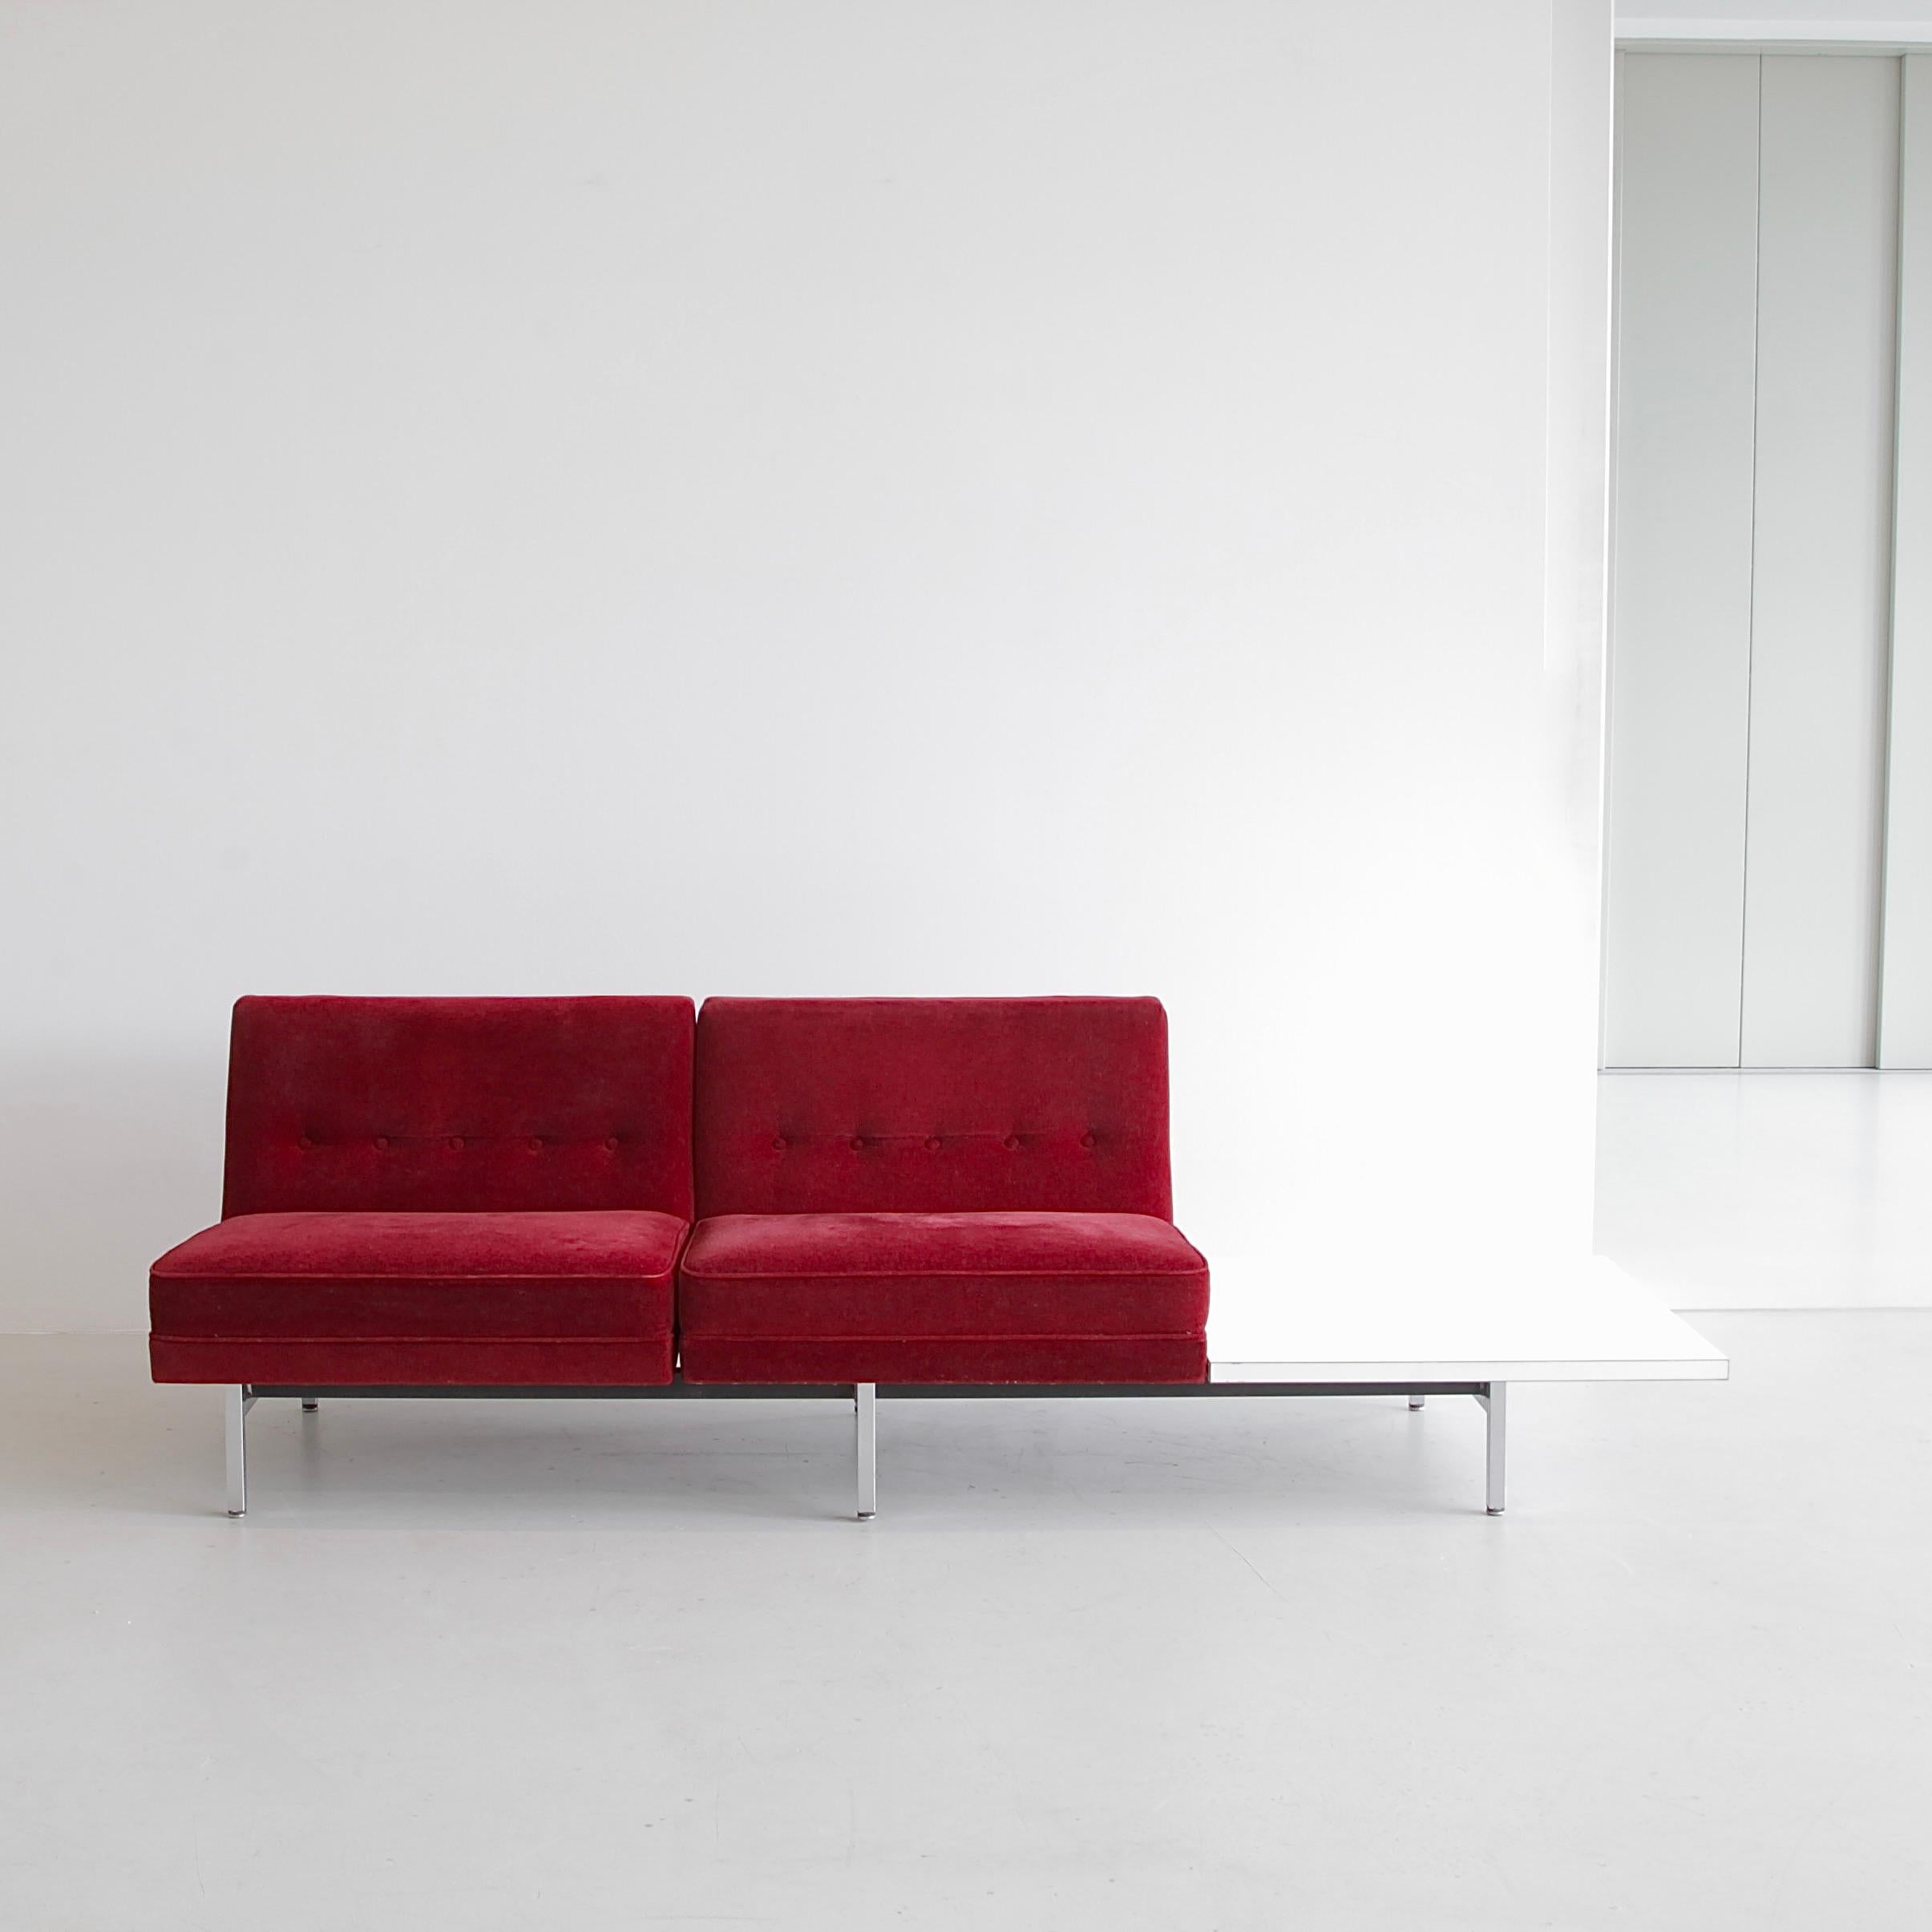 Two-seat Sofa designed by George Nelson. U.S.A., Herman Miller, 1960s.

Modular Sofa by George Nelson with a strong metal structure including chrome-plated feet. Two vintage red Mohair upholstered Seats with buttoned backrests and a square Formica